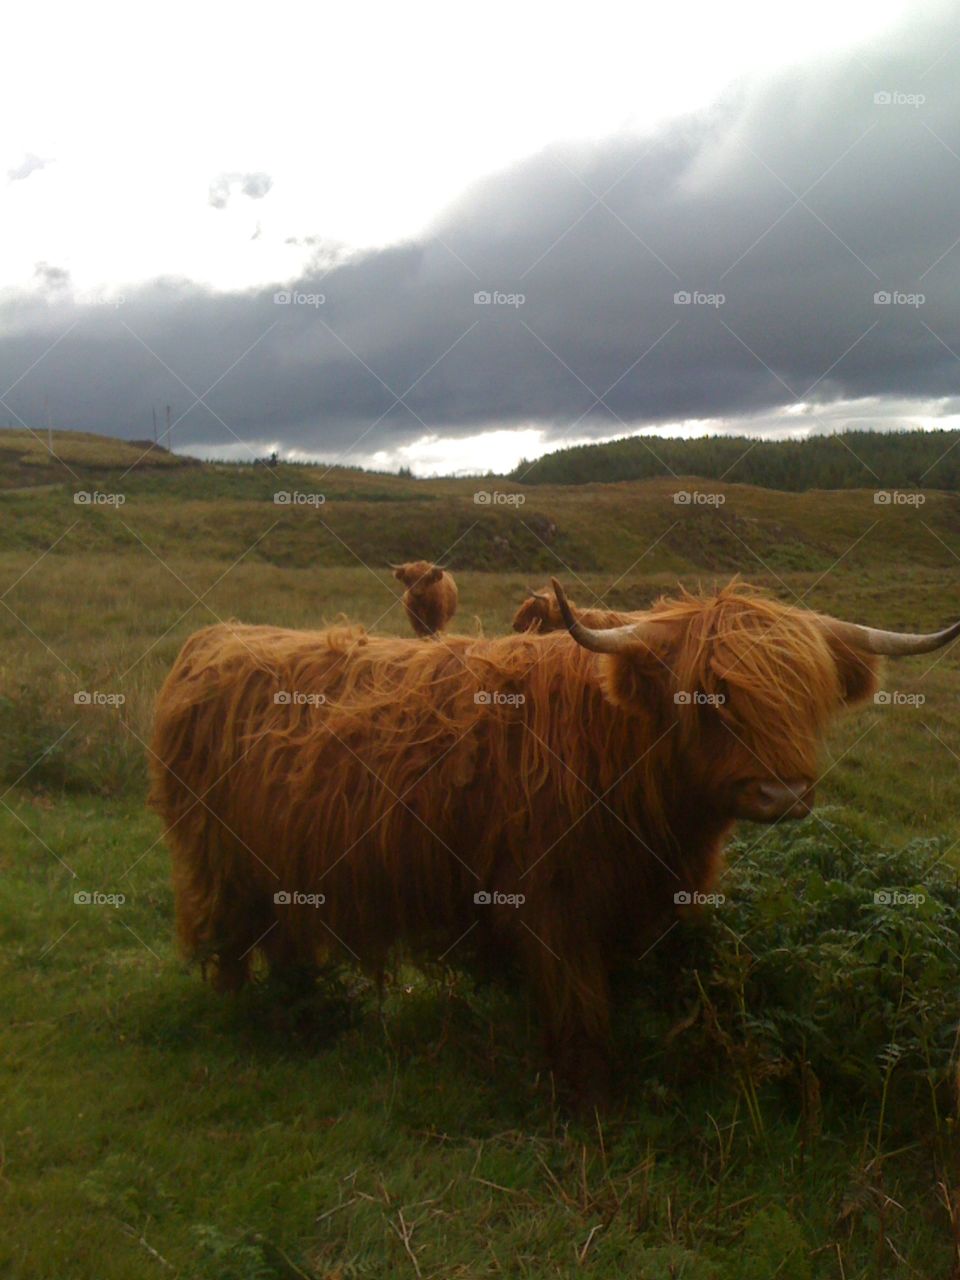 Cows in the isle of Mull